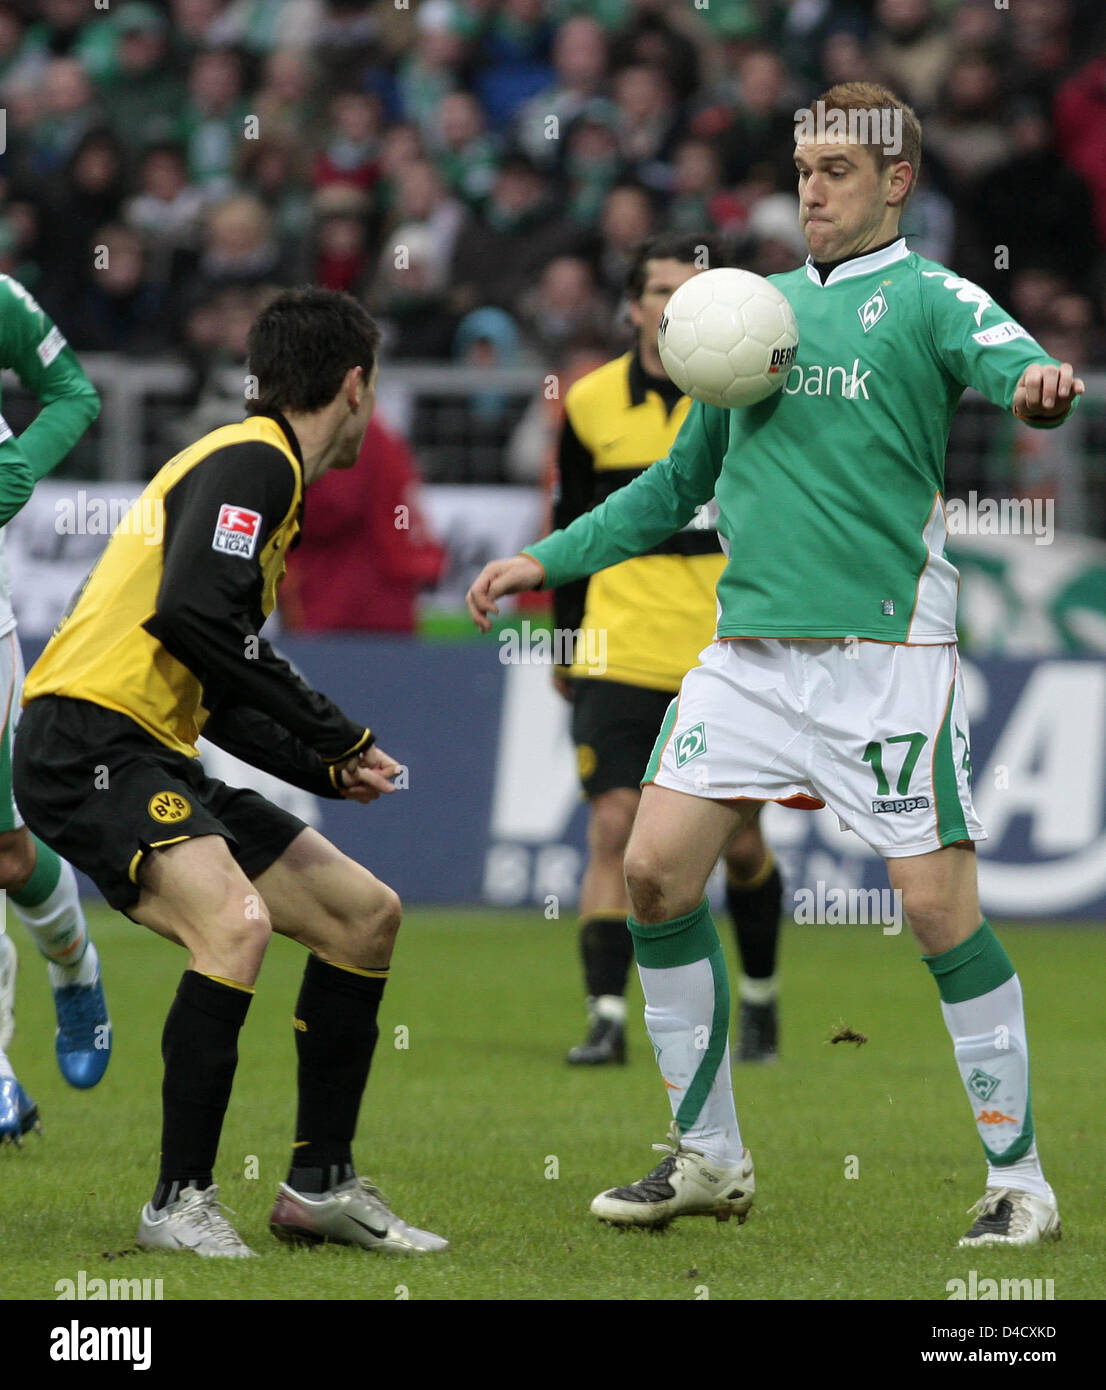 Bremen's Ivan Klasnic (R) and Dortmund's Antonio Rukavina shown in action during the Bundesliga match Werder Bremen - Borussia Dortmund at Weser Stadion in Bremen, Germany, 1 March 2008. Bremen won 2-0. Photo: CARMEN JASPERSEN  (ATTENTION: EMBARGO CONDITIONS! The DFL permits the further utilisation of the pictures in IPTV, mobile services and other new technologies no earlier than  Stock Photo